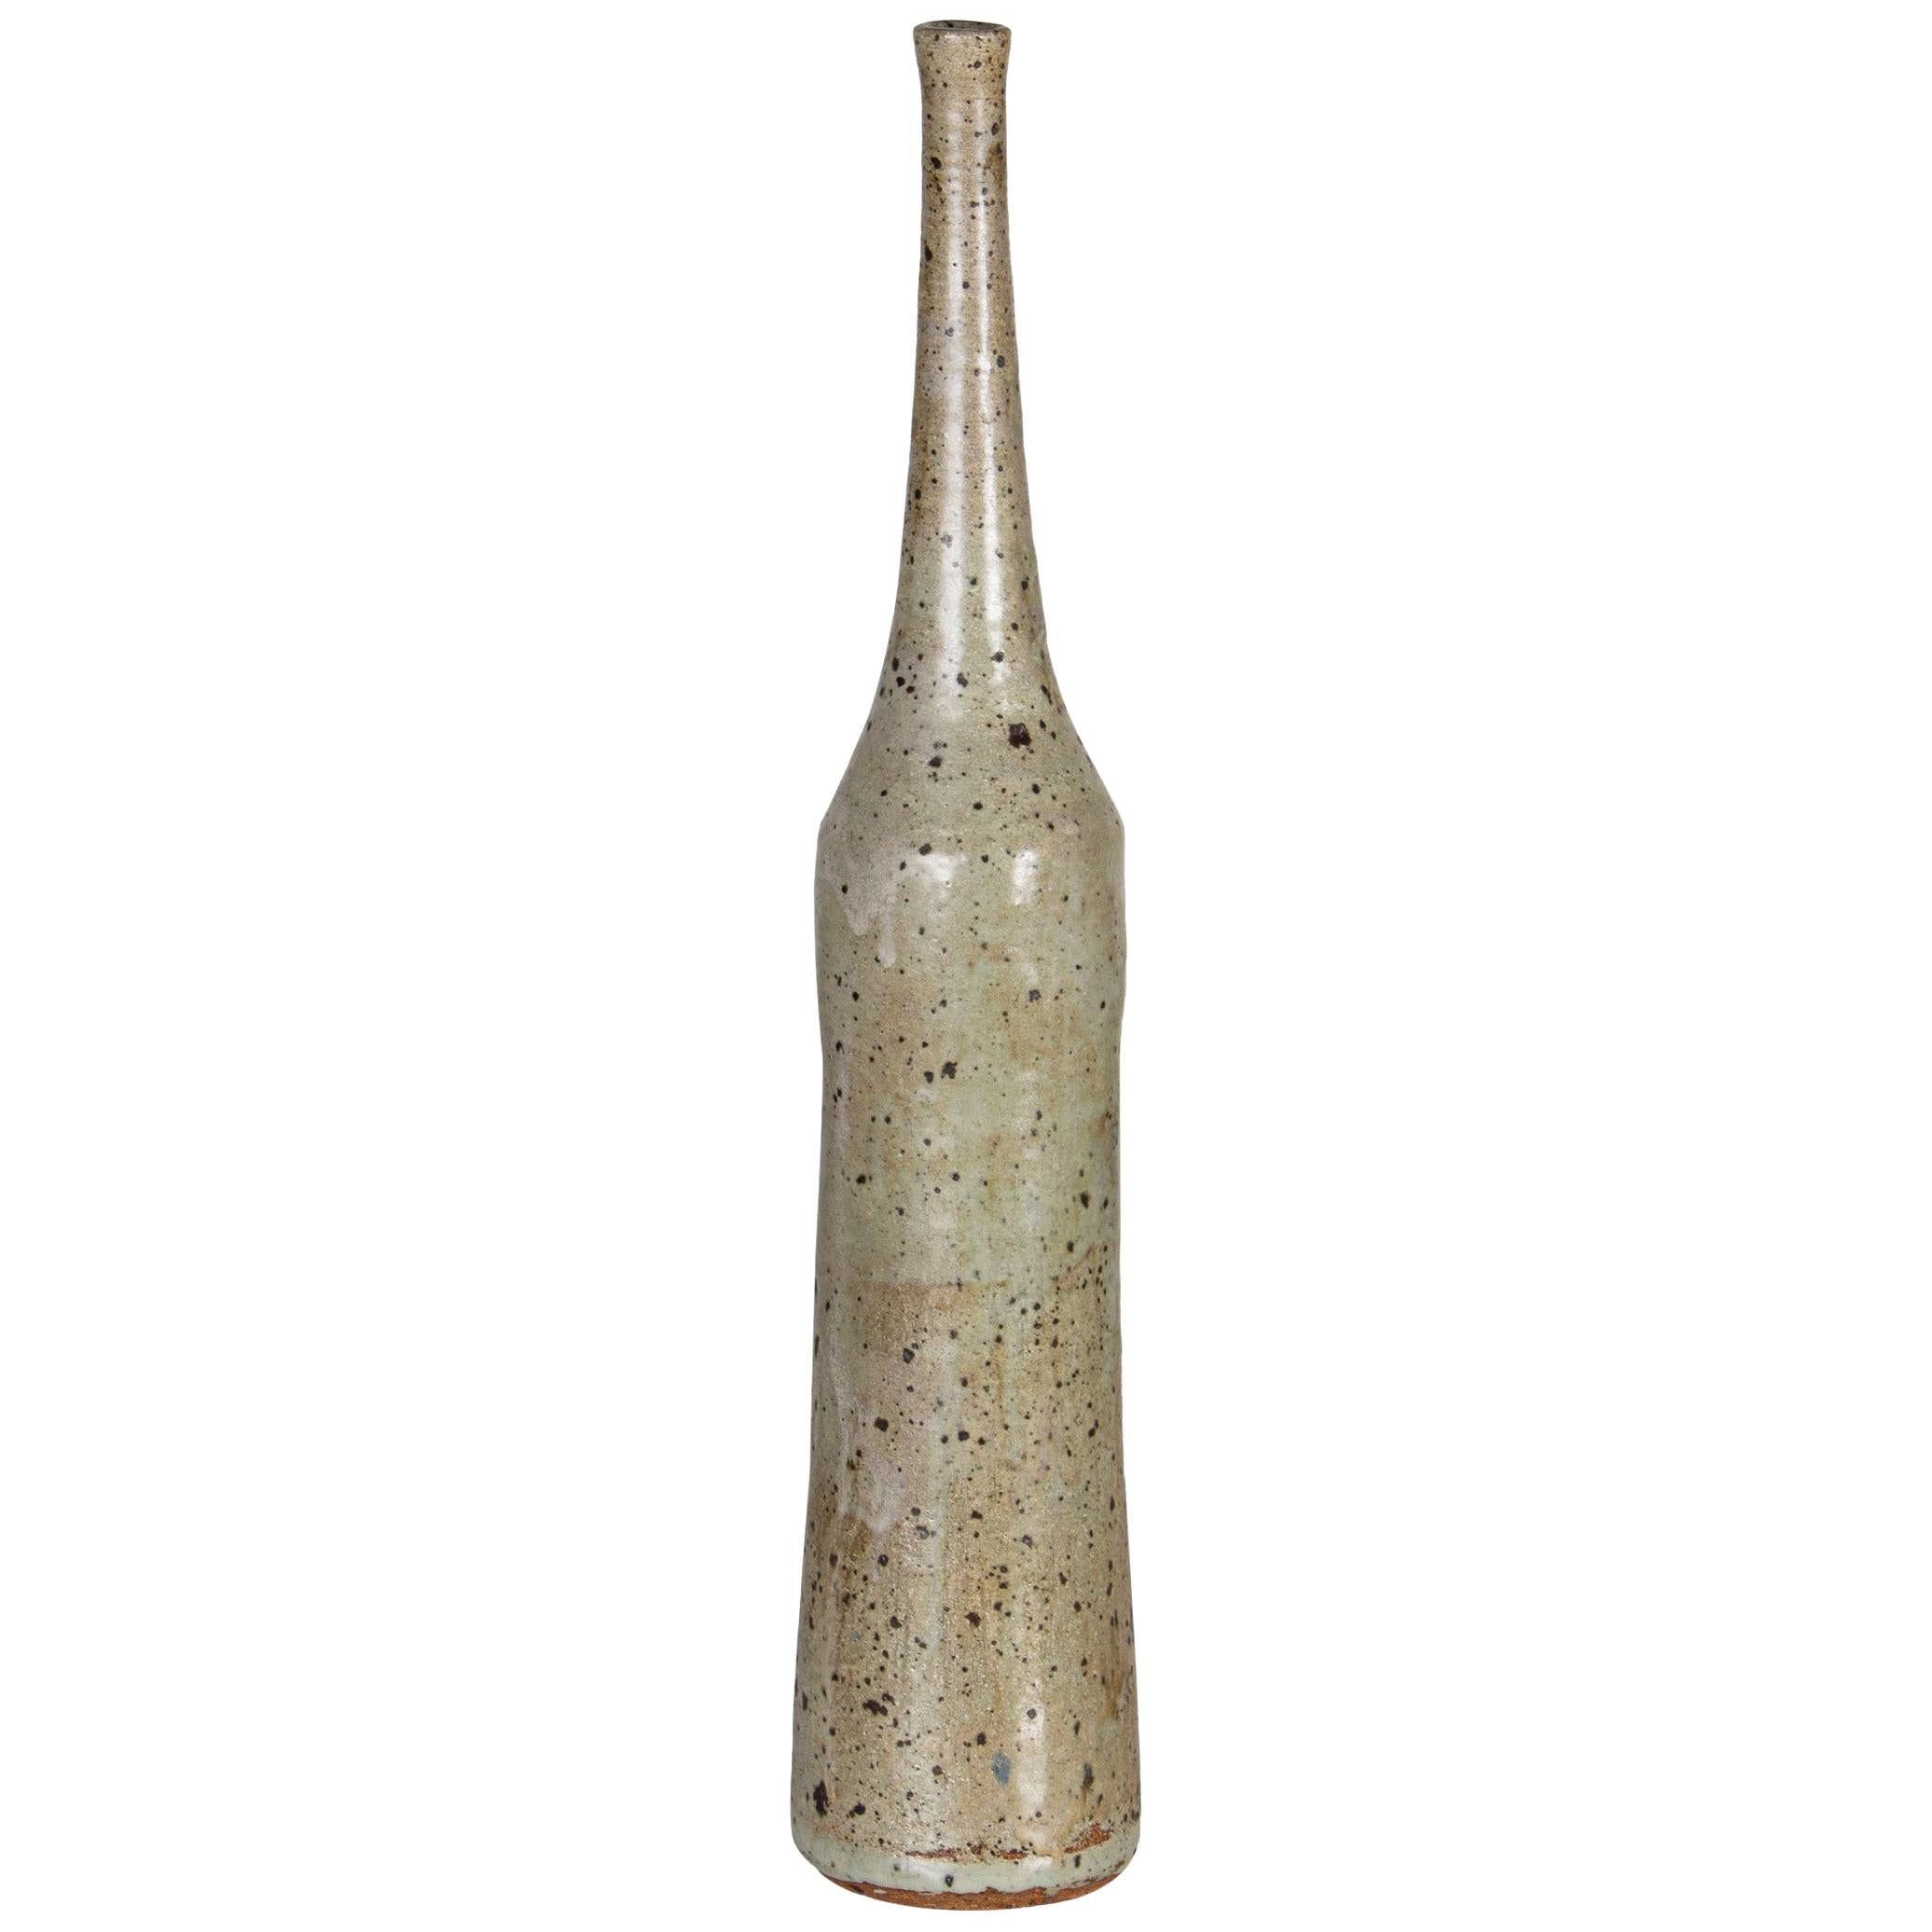 Tall Hand Thrown Bottle Signed "Isla"